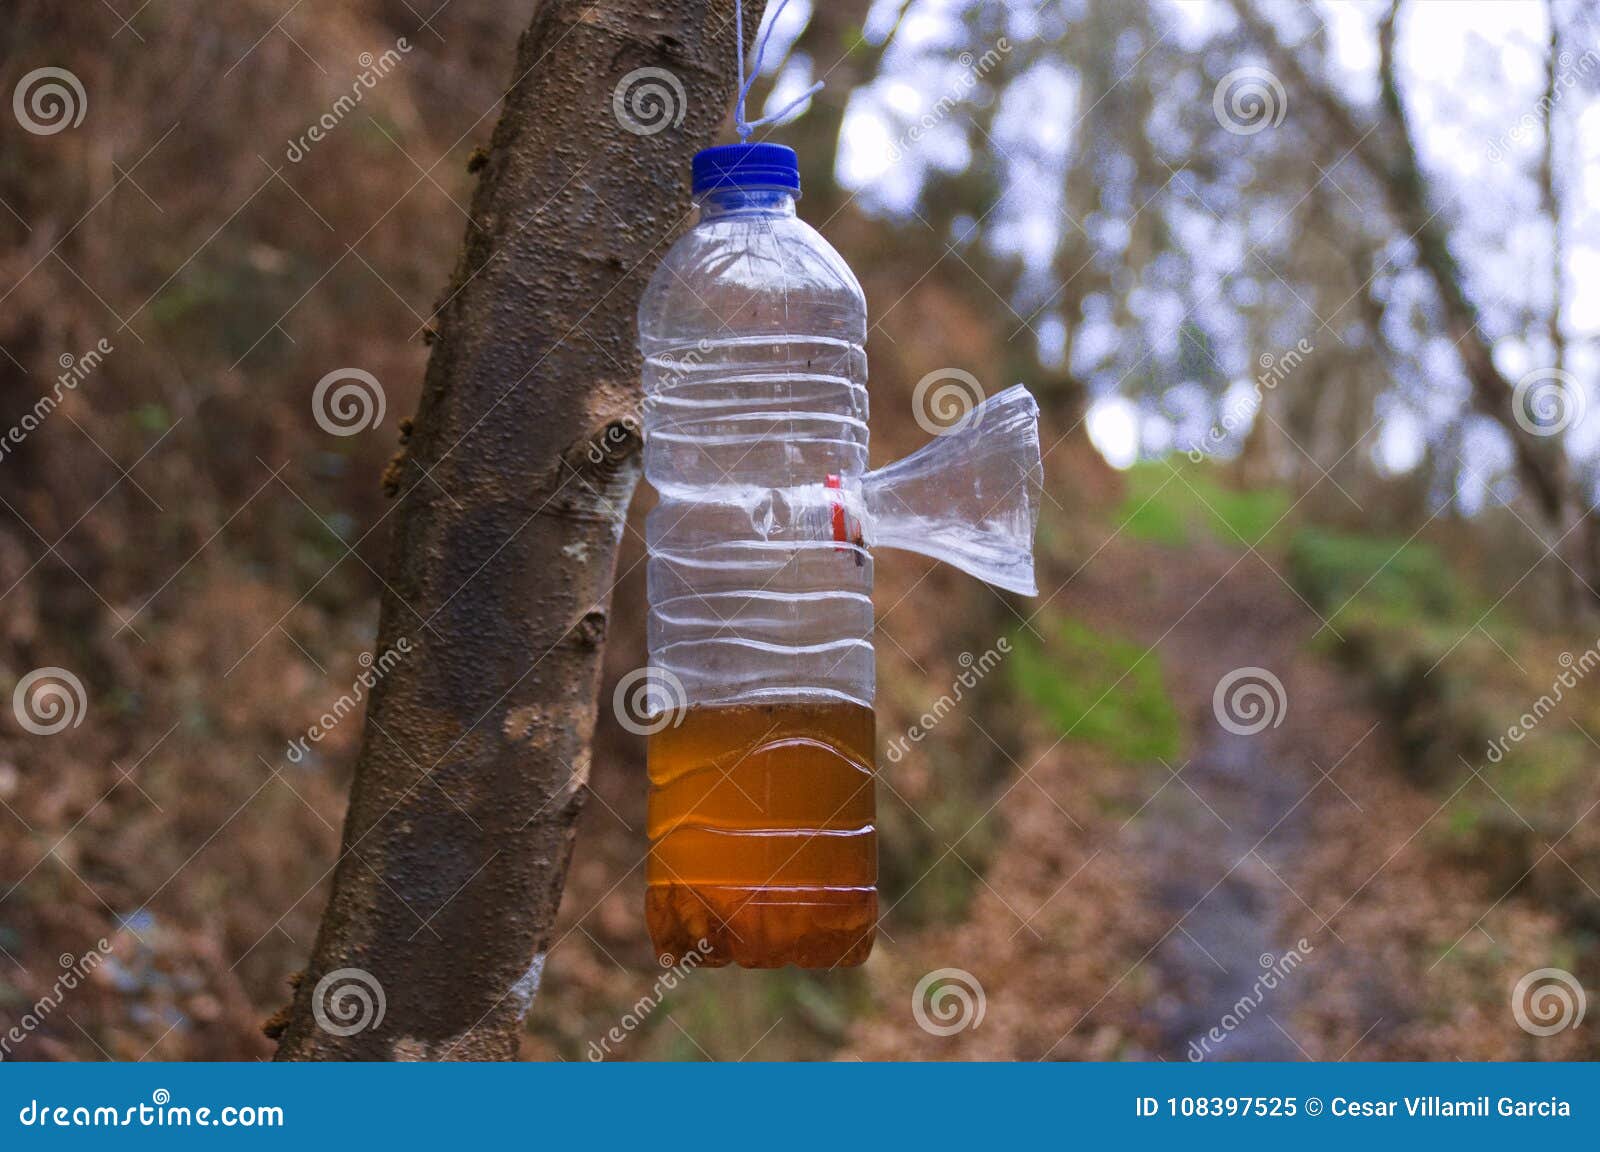 Wasp Trap in Plastic Bottle Stock Image - Image of spring, enter: 108397525